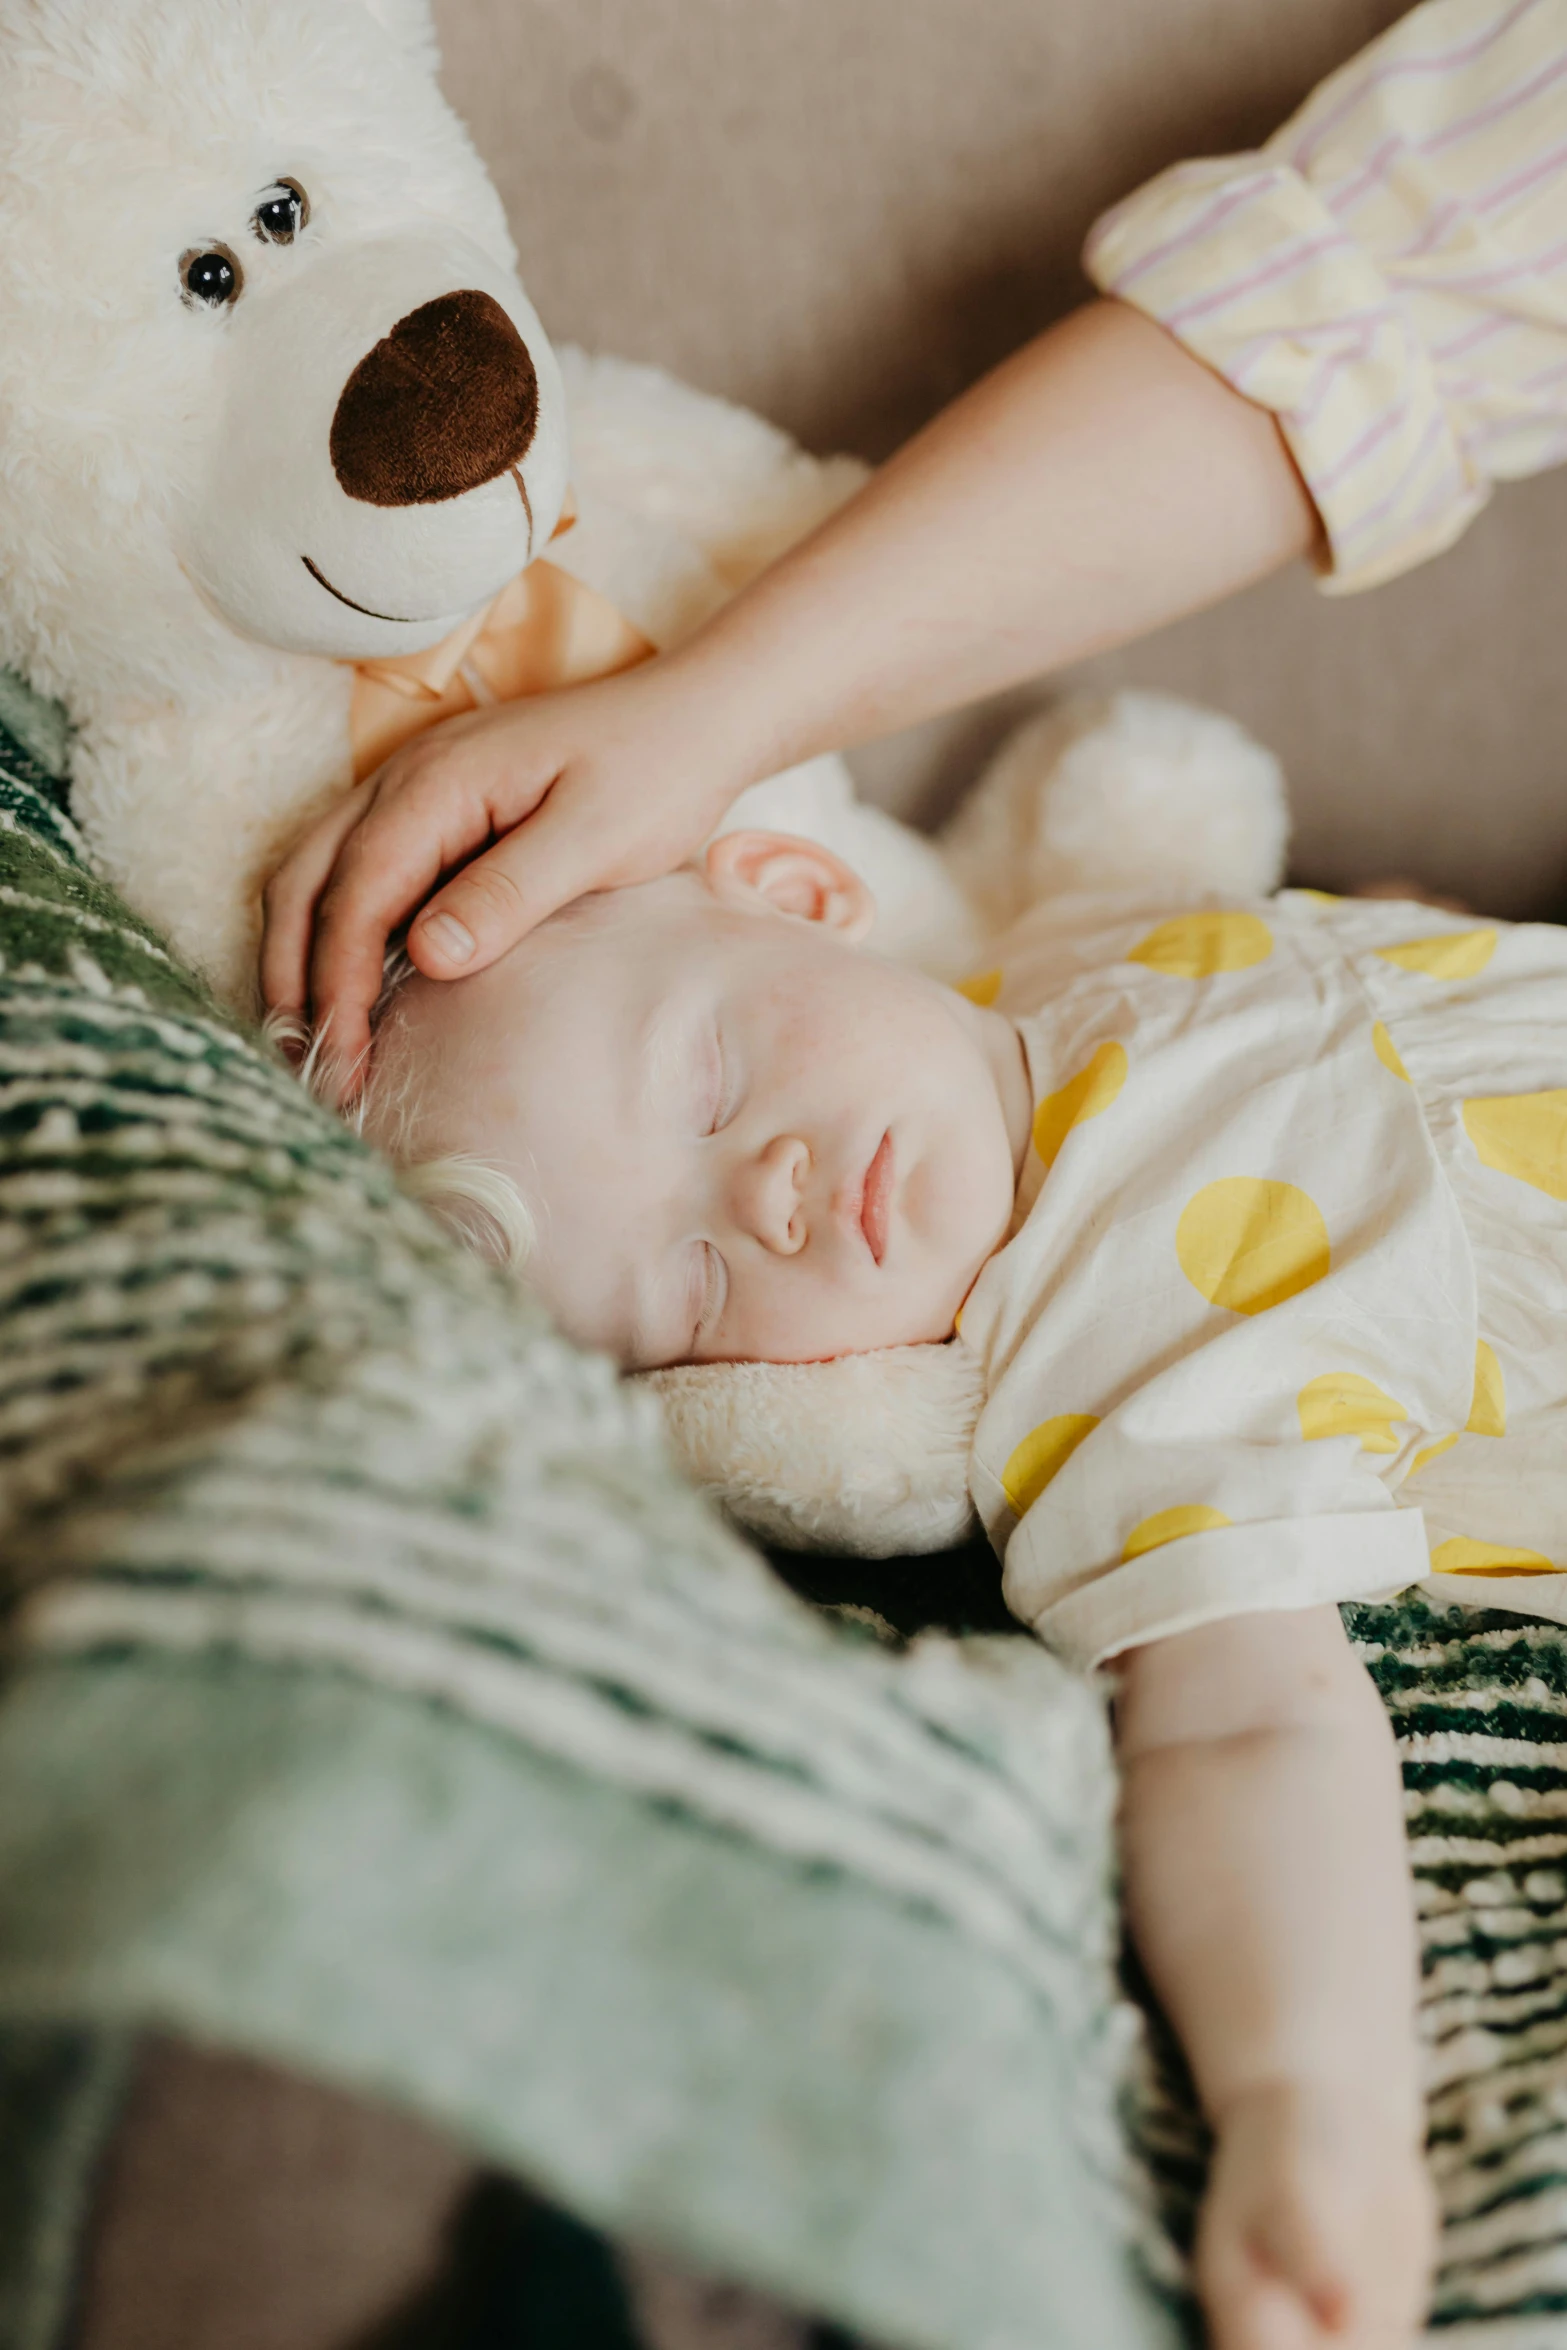 a baby laying in a basket next to a teddy bear, pexels contest winner, he holds her while she sleeps, albino white pale skin, relaxing on a couch, eyes closed